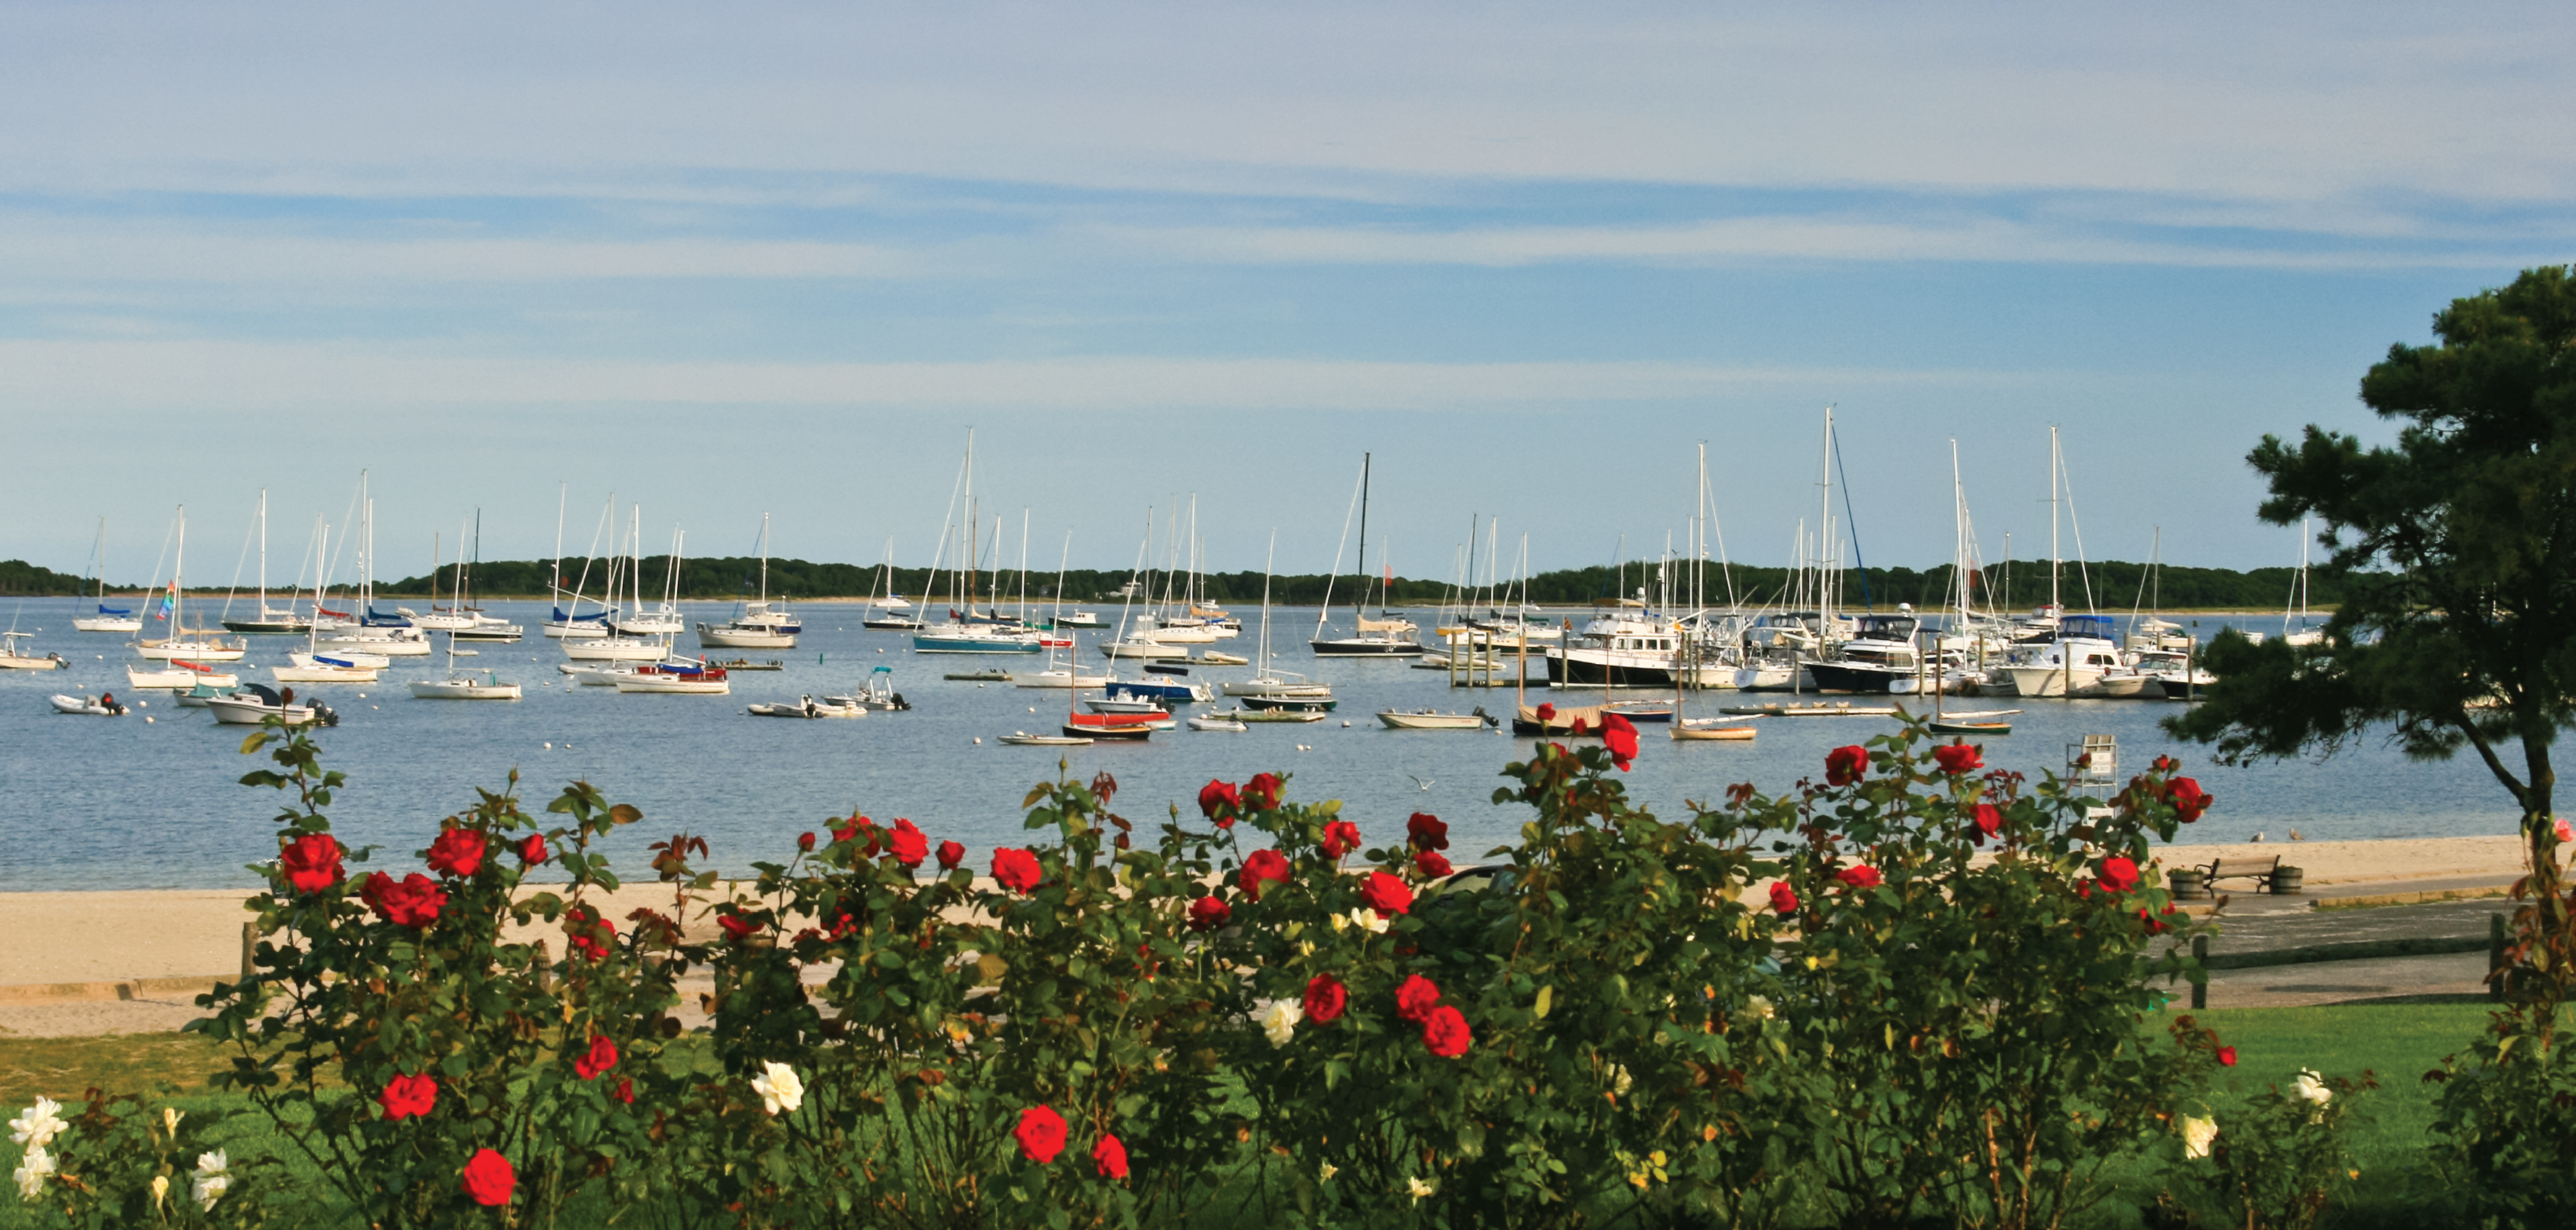 Lewis Bay Hyanis Harbor with boats and red flowers